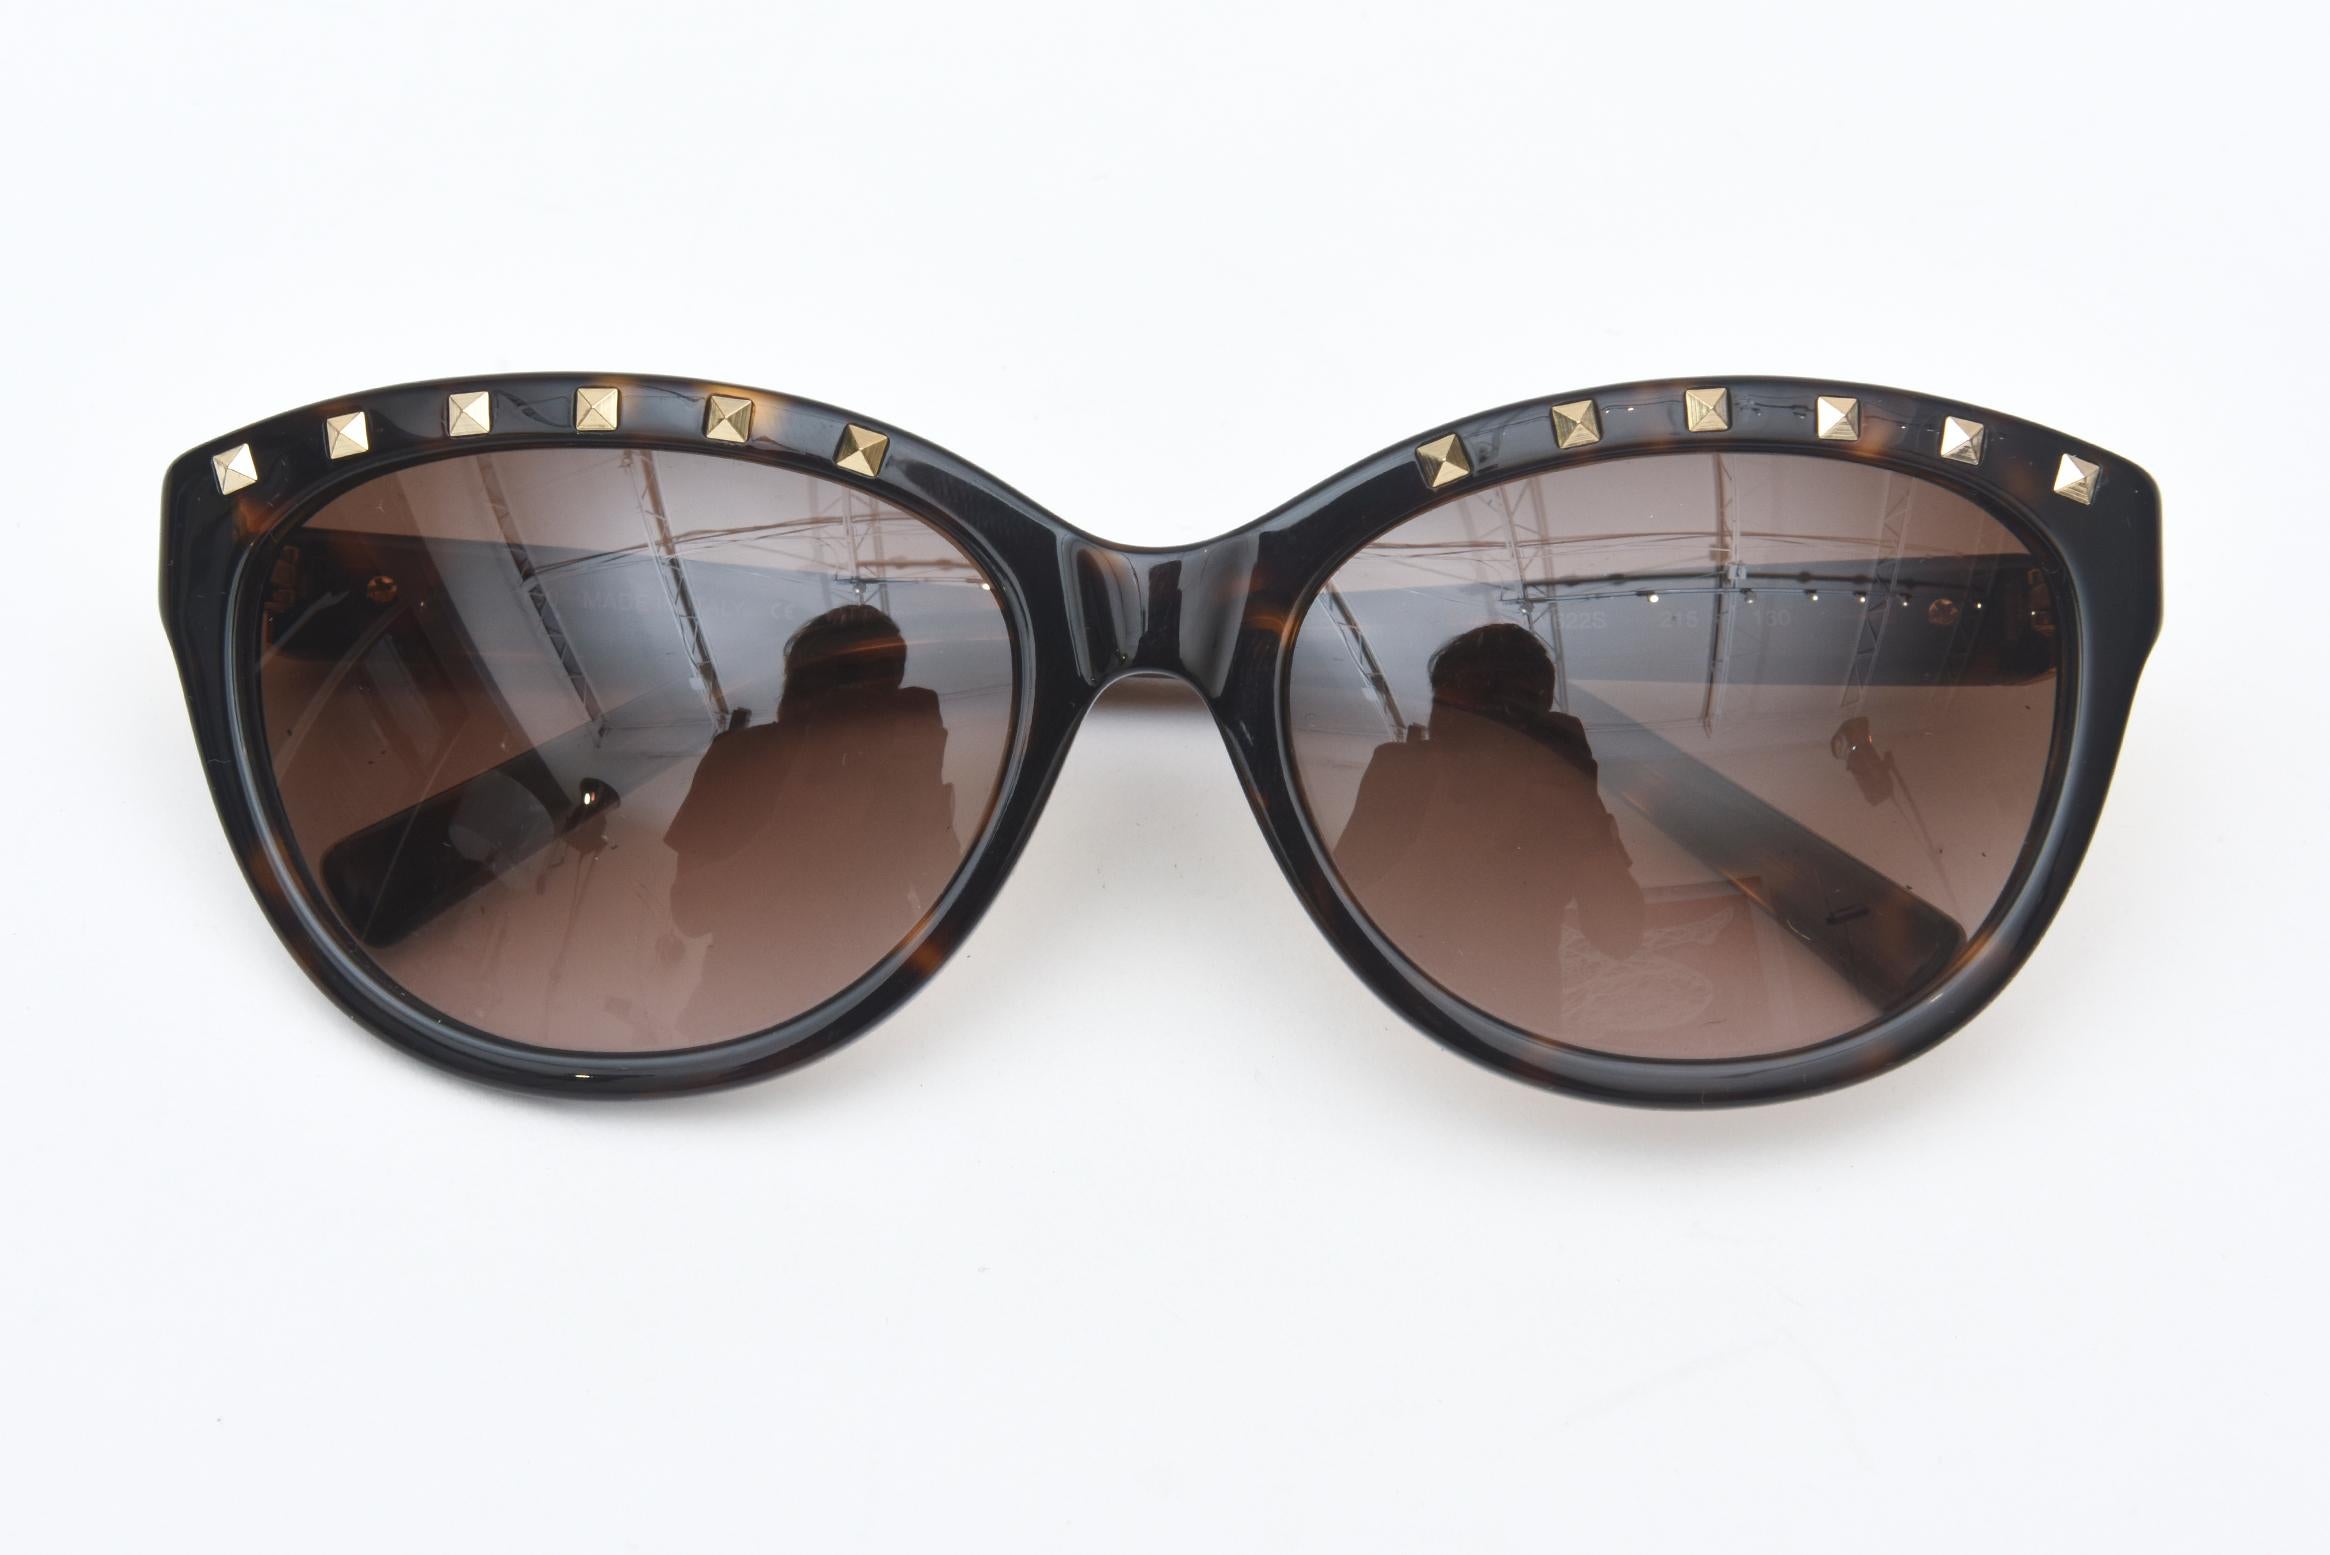 These lovely pair of Valentino brass stud sunglasses are in the shape of a cat eye. Always flattering on the face. The color is brown tortoise effect. As said, they have studs on the frame. These were never used and have no wear. They are